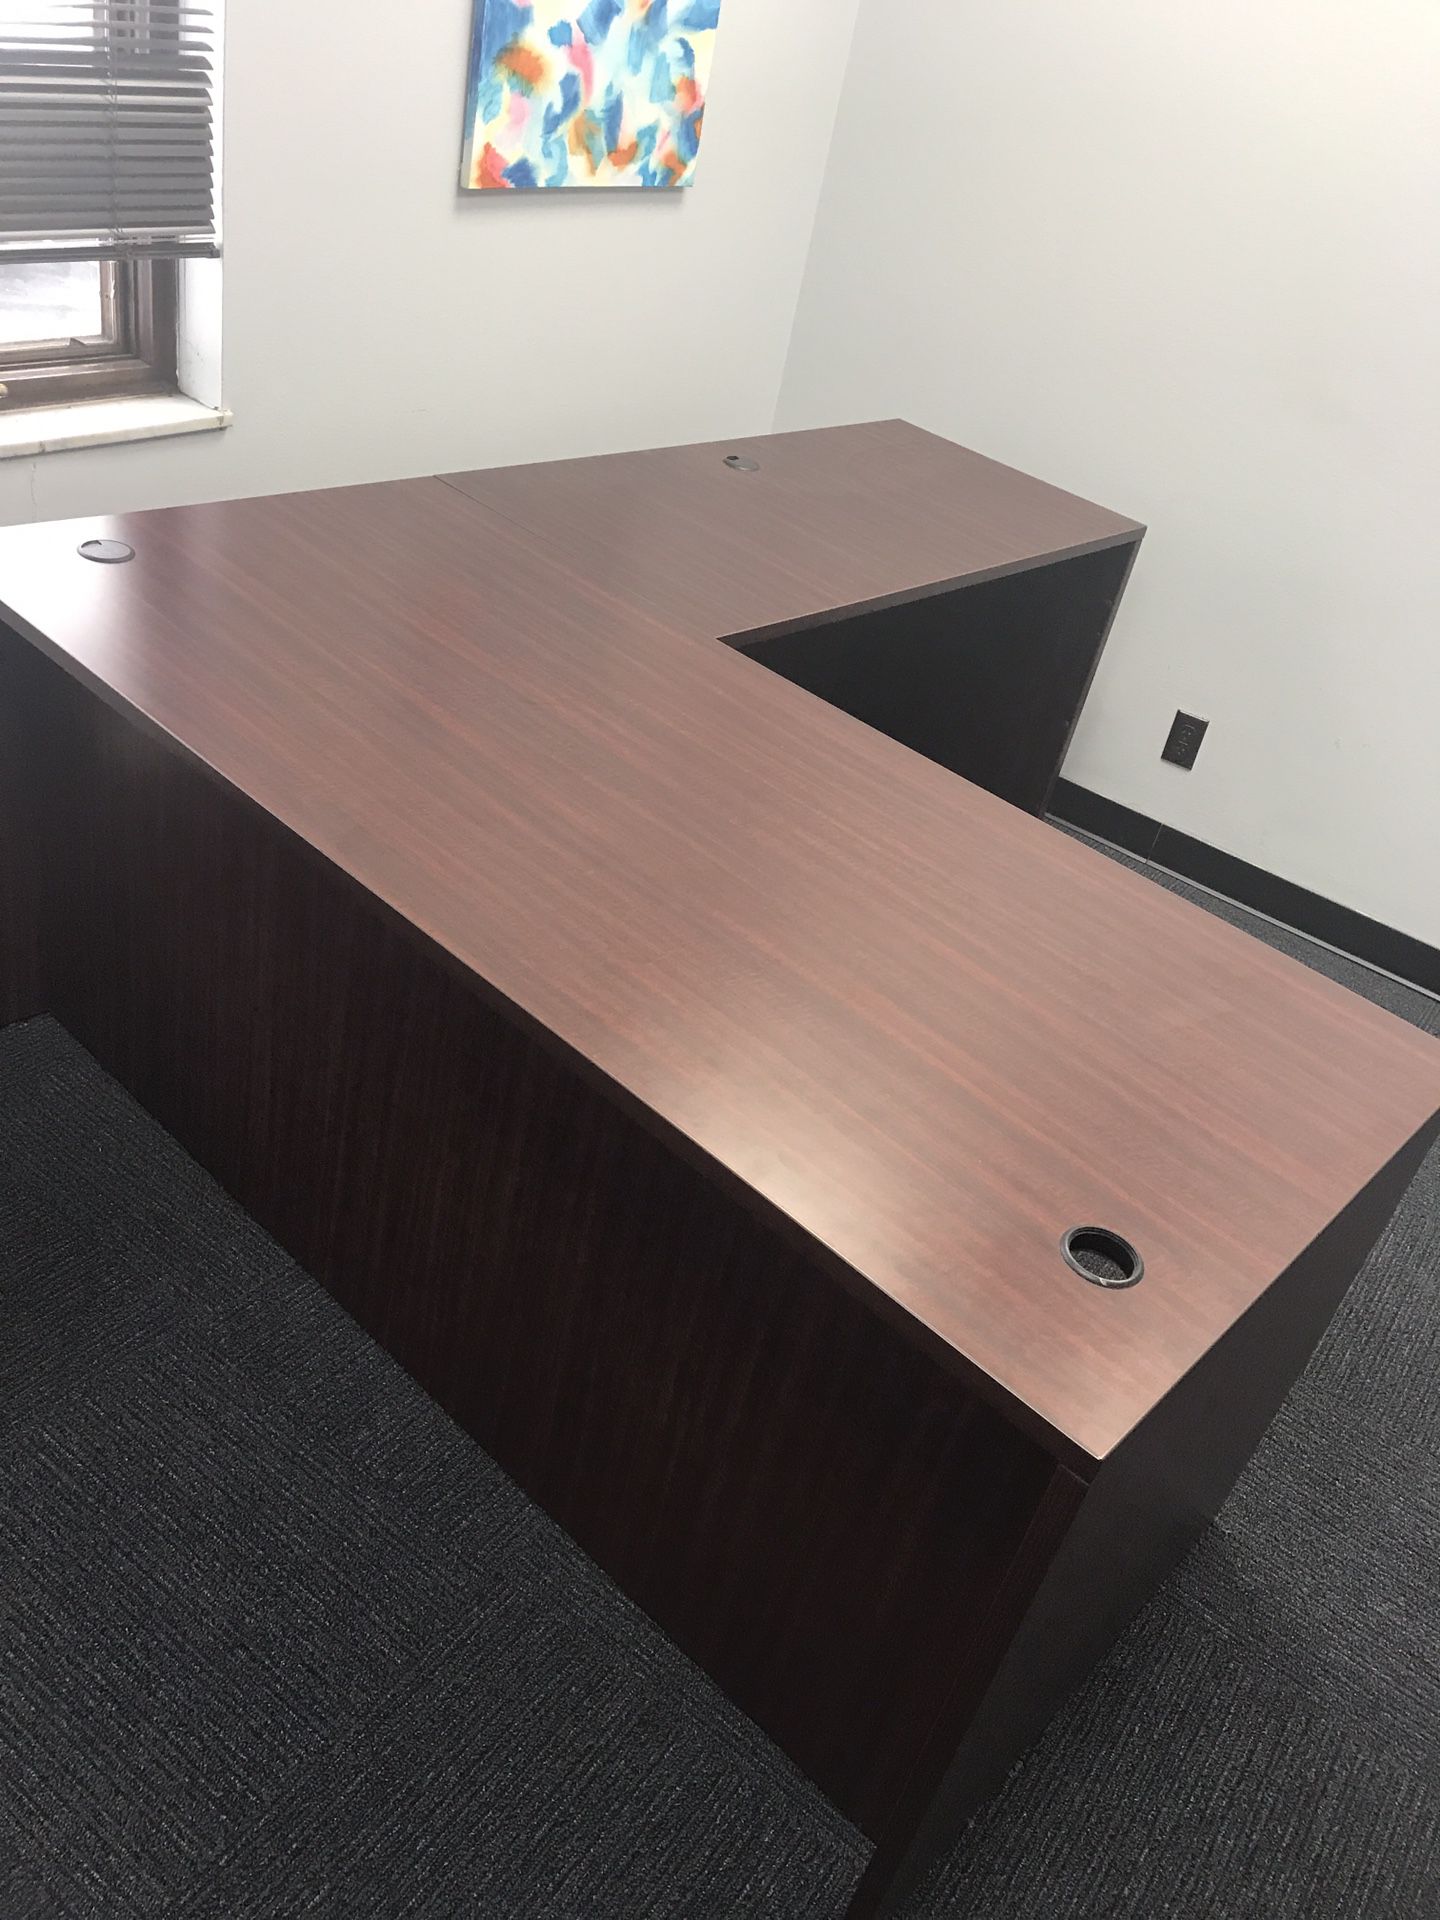 Office furniture for sale all pieces or individual best offer all negotiable all in new condition